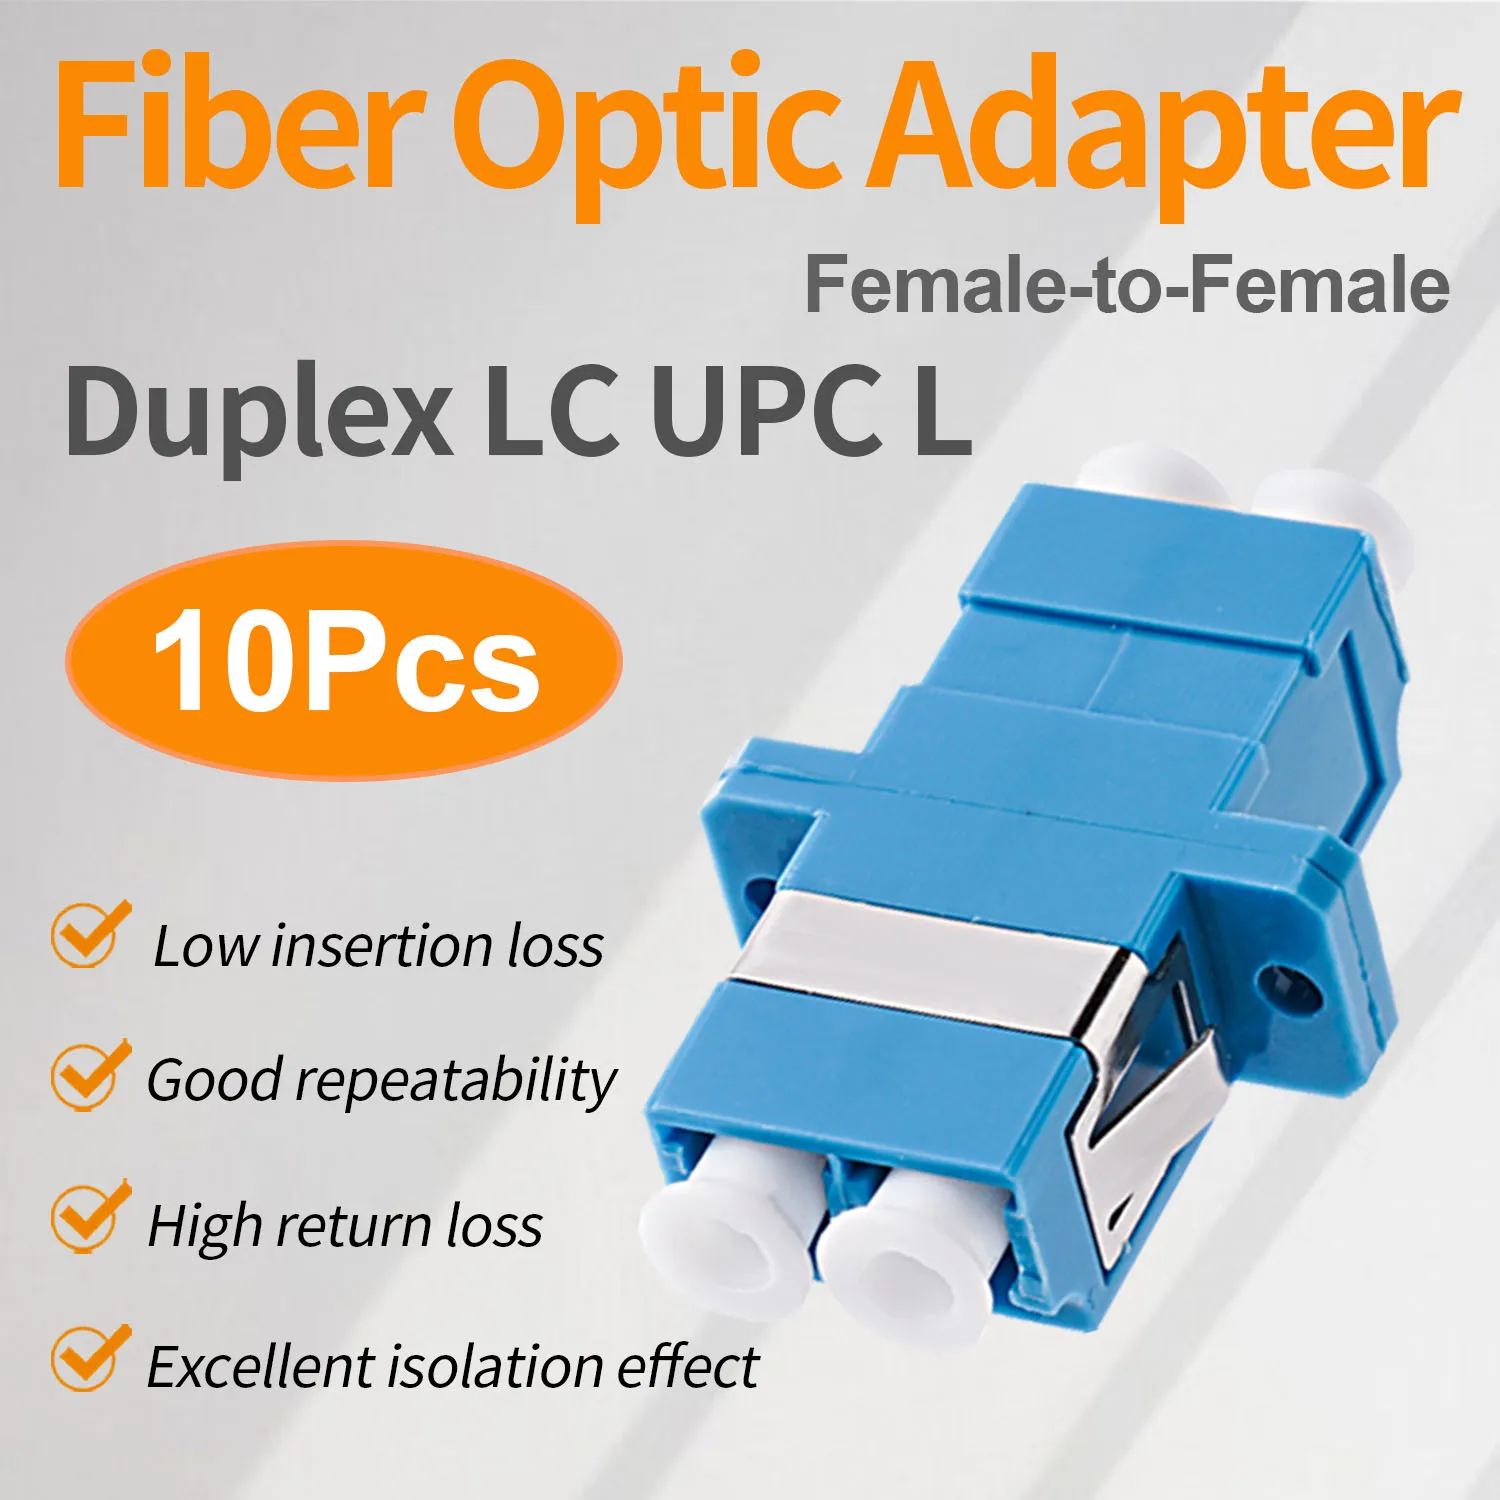 

10 Pcs LC UPC Couplers, Duplex Fiber Optical Adapters Cable Connectors with Panel Mounting Wing Flange Ftth